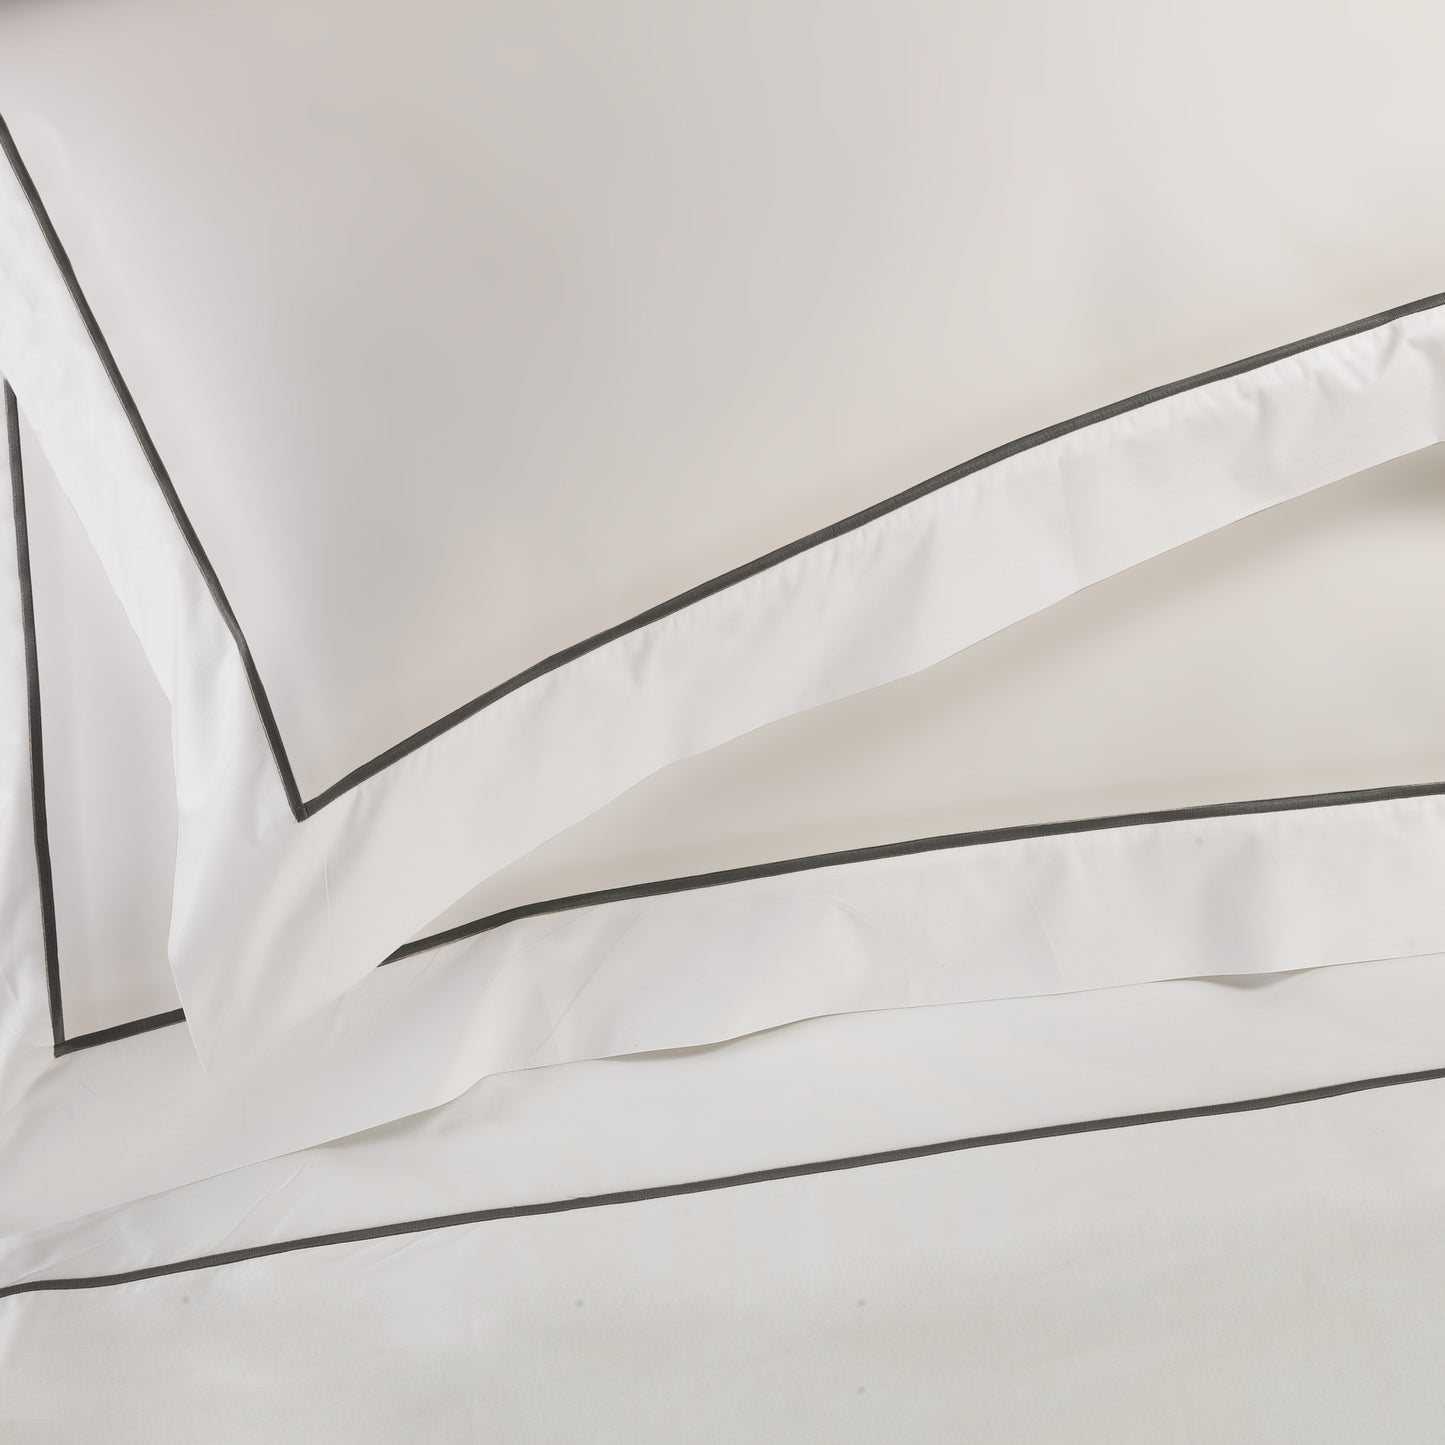 600TC Cotton Satin Duvet Cover Set with Embroidered Wand - Viscontea